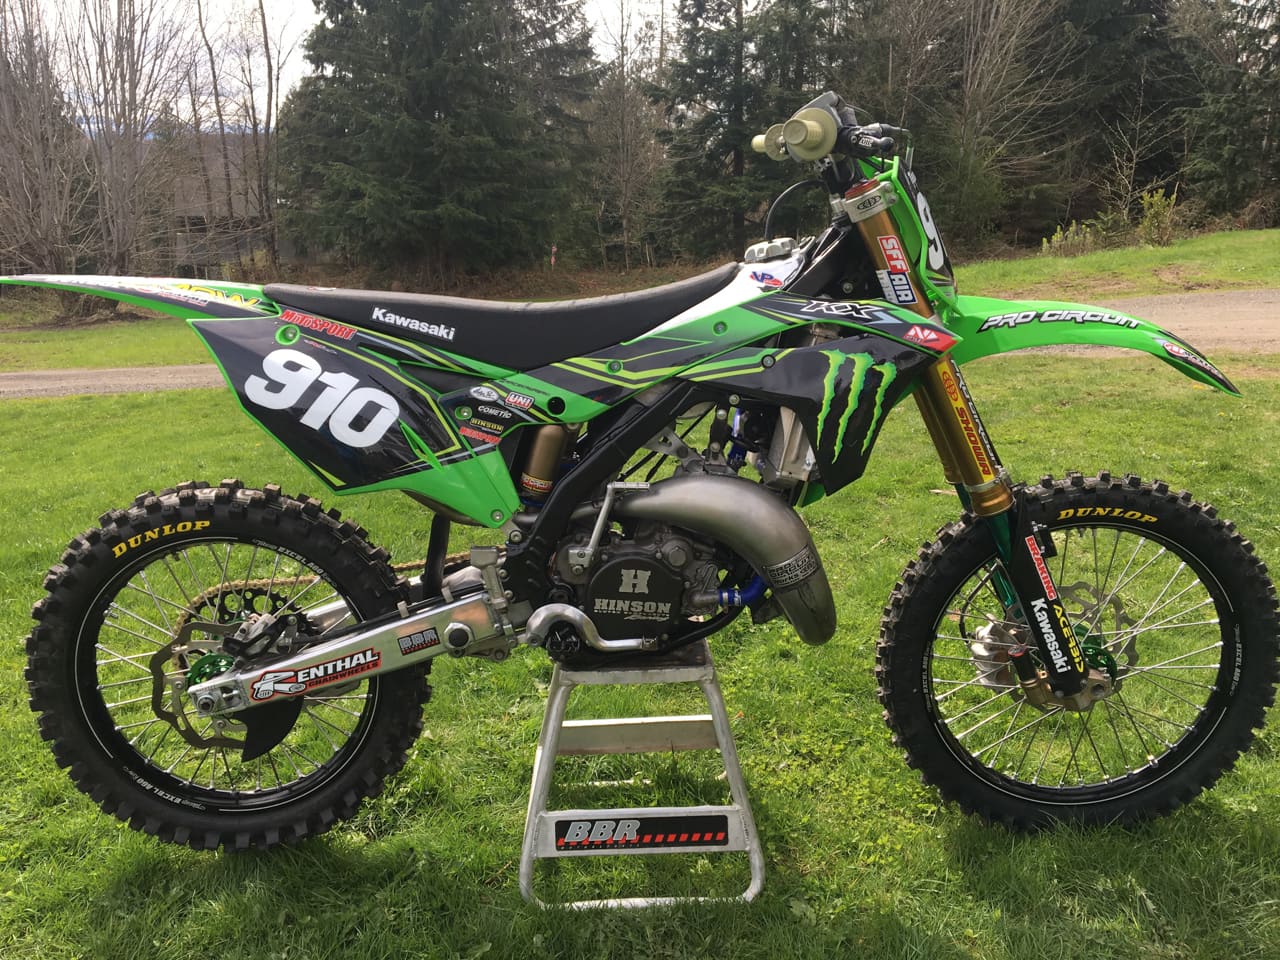 TWO-STROKE THE KX125 OF THE FUTURE - Motocross Action Magazine